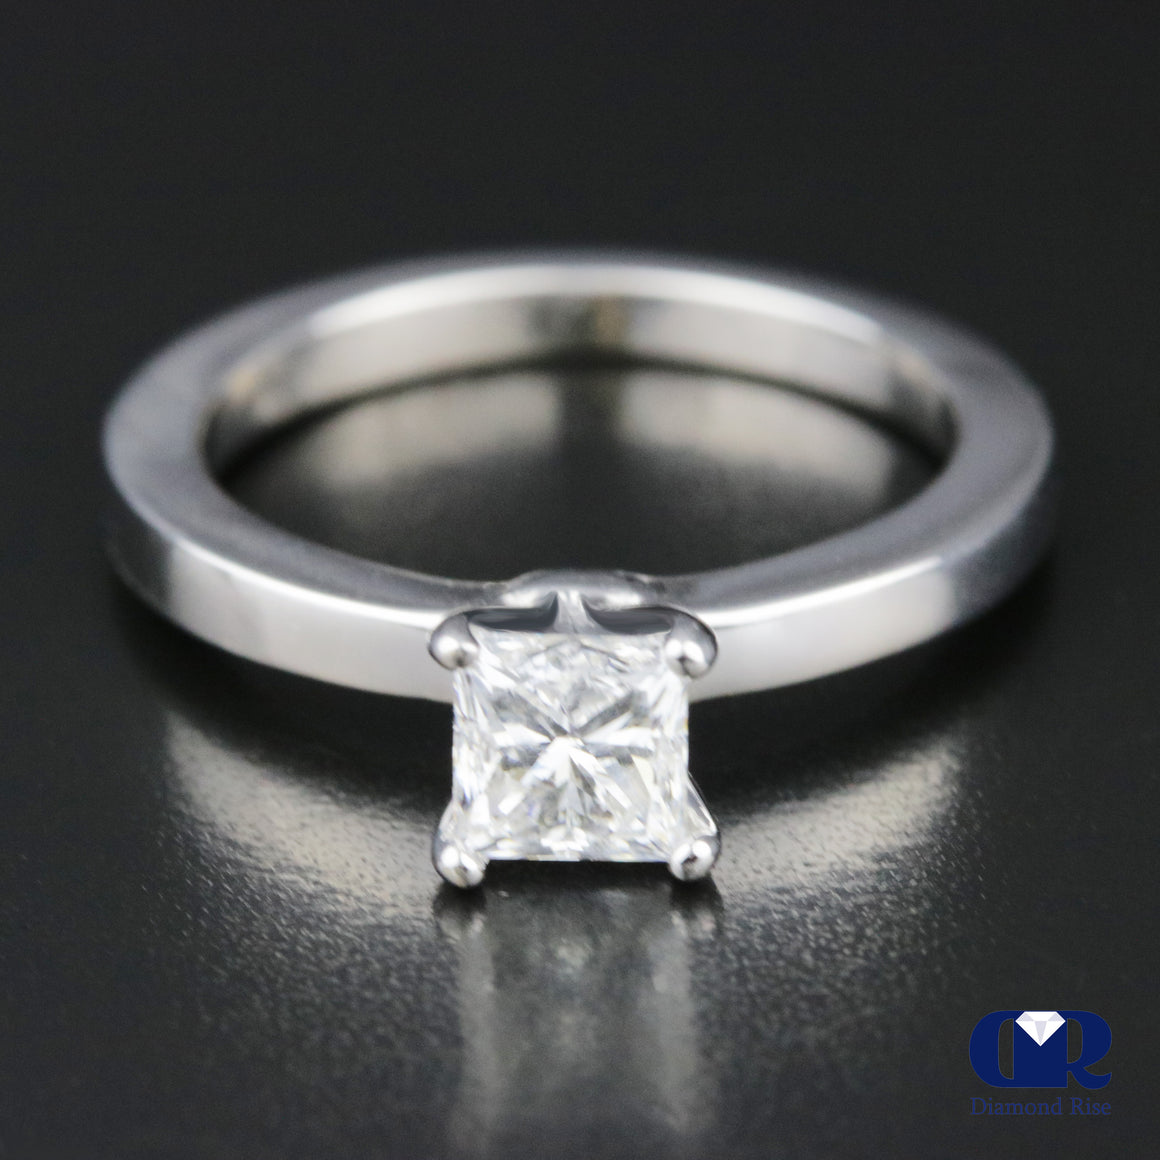 0.65 Carat Princess Cut Diamond 4 Prong Solitaire Engagement Ring In 14K White Gold - Diamond Rise Jewelry